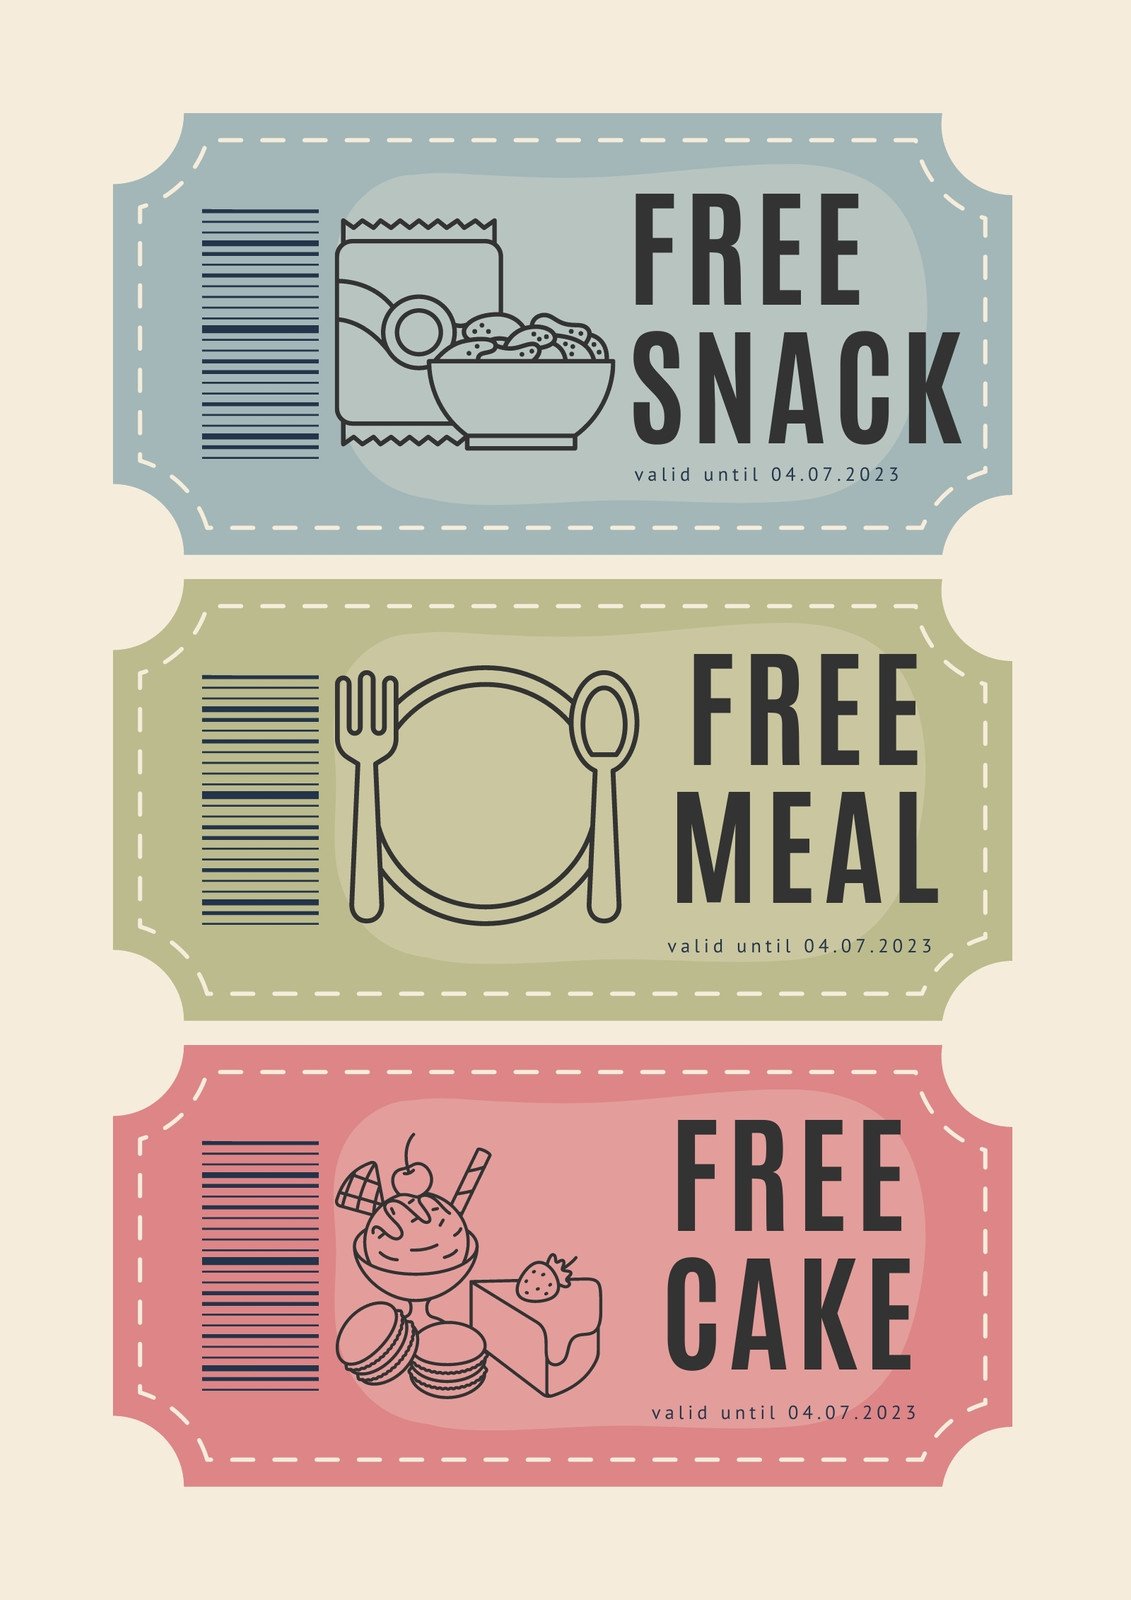 Snack sample coupons